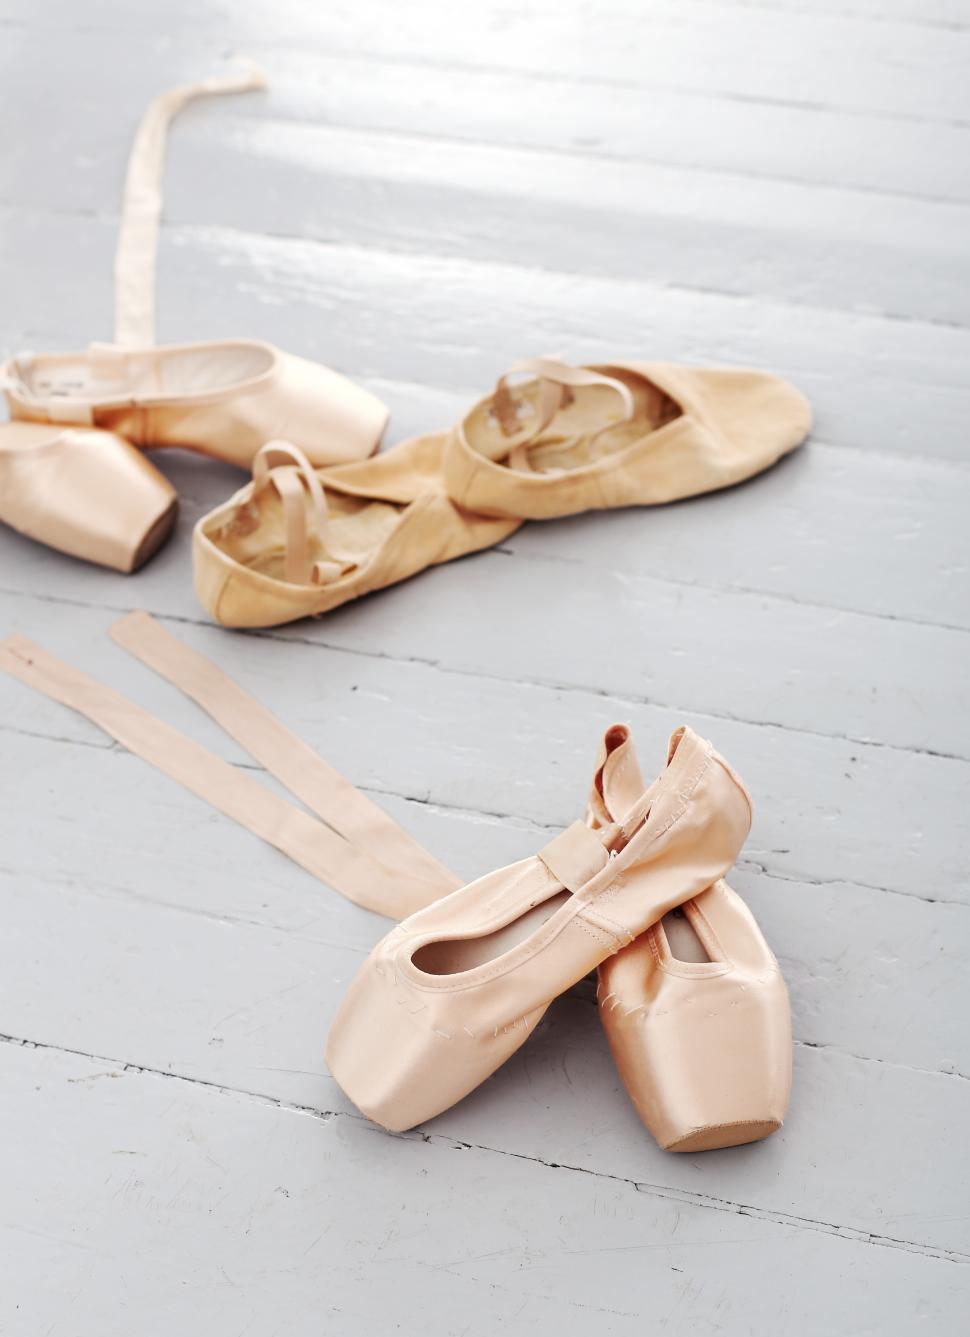 Ballet shoes lay alone on the floor